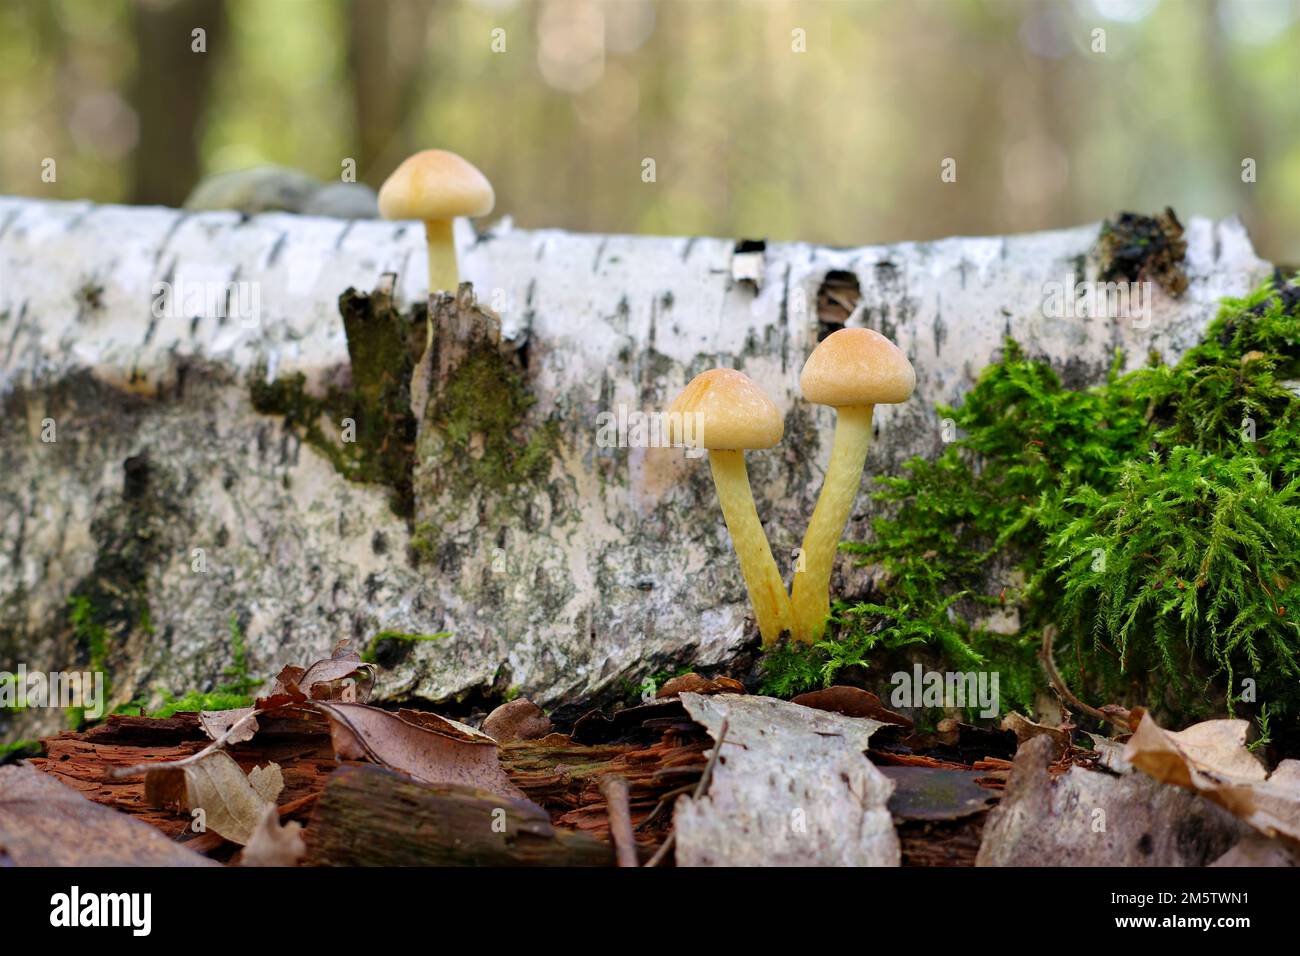 clustered woodlover or Hypholoma fasciculare in autumn forest Stock Photo